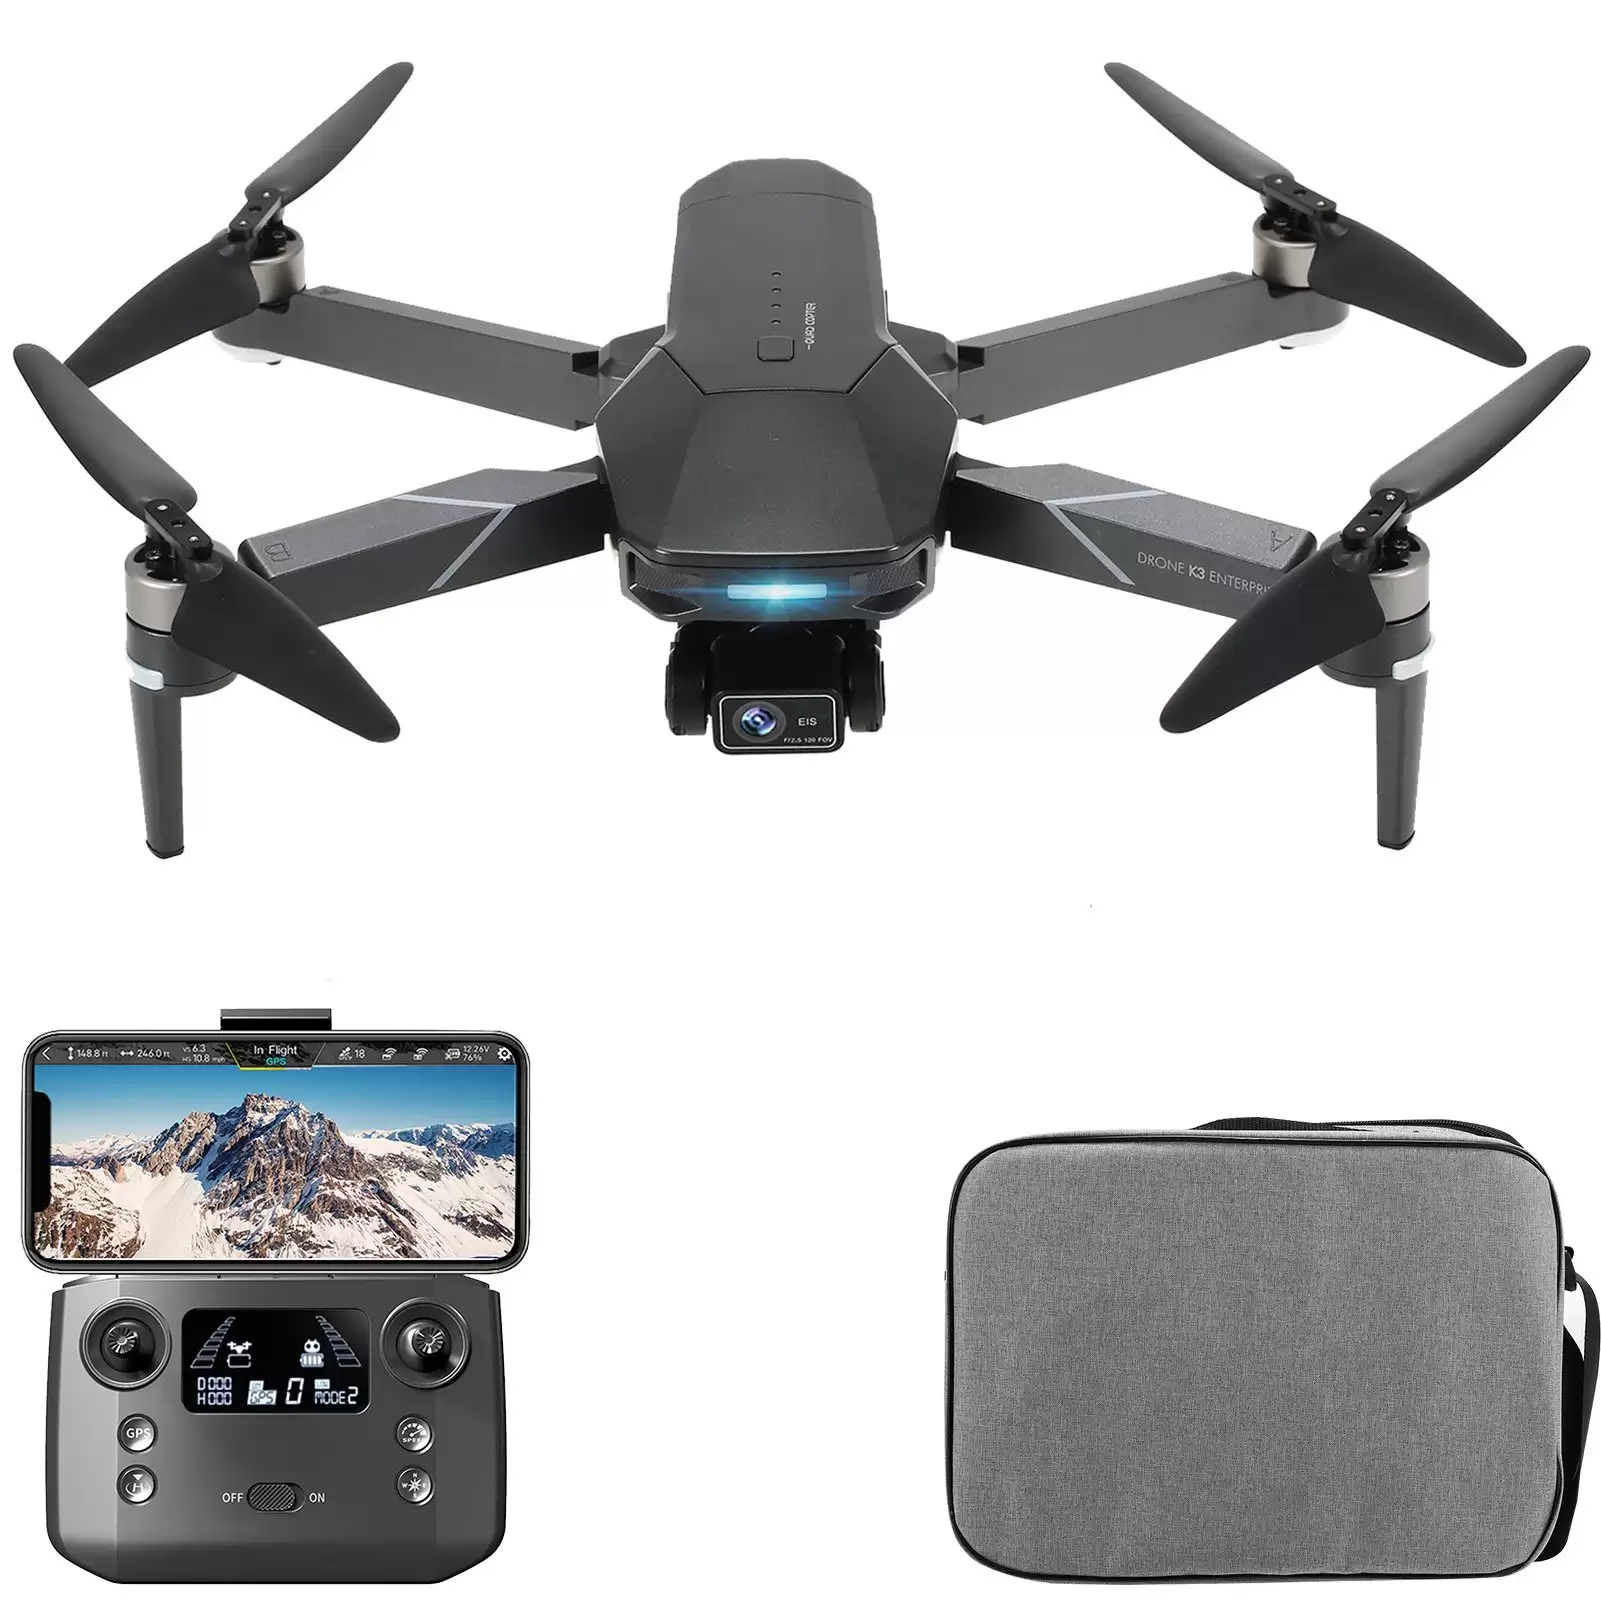 Take Additional $10 Discount On Visuo K3 5g Wifi Fpv Gps Eis 2.7k Camera Rc Drone With This Discount Coupon At Tomtop